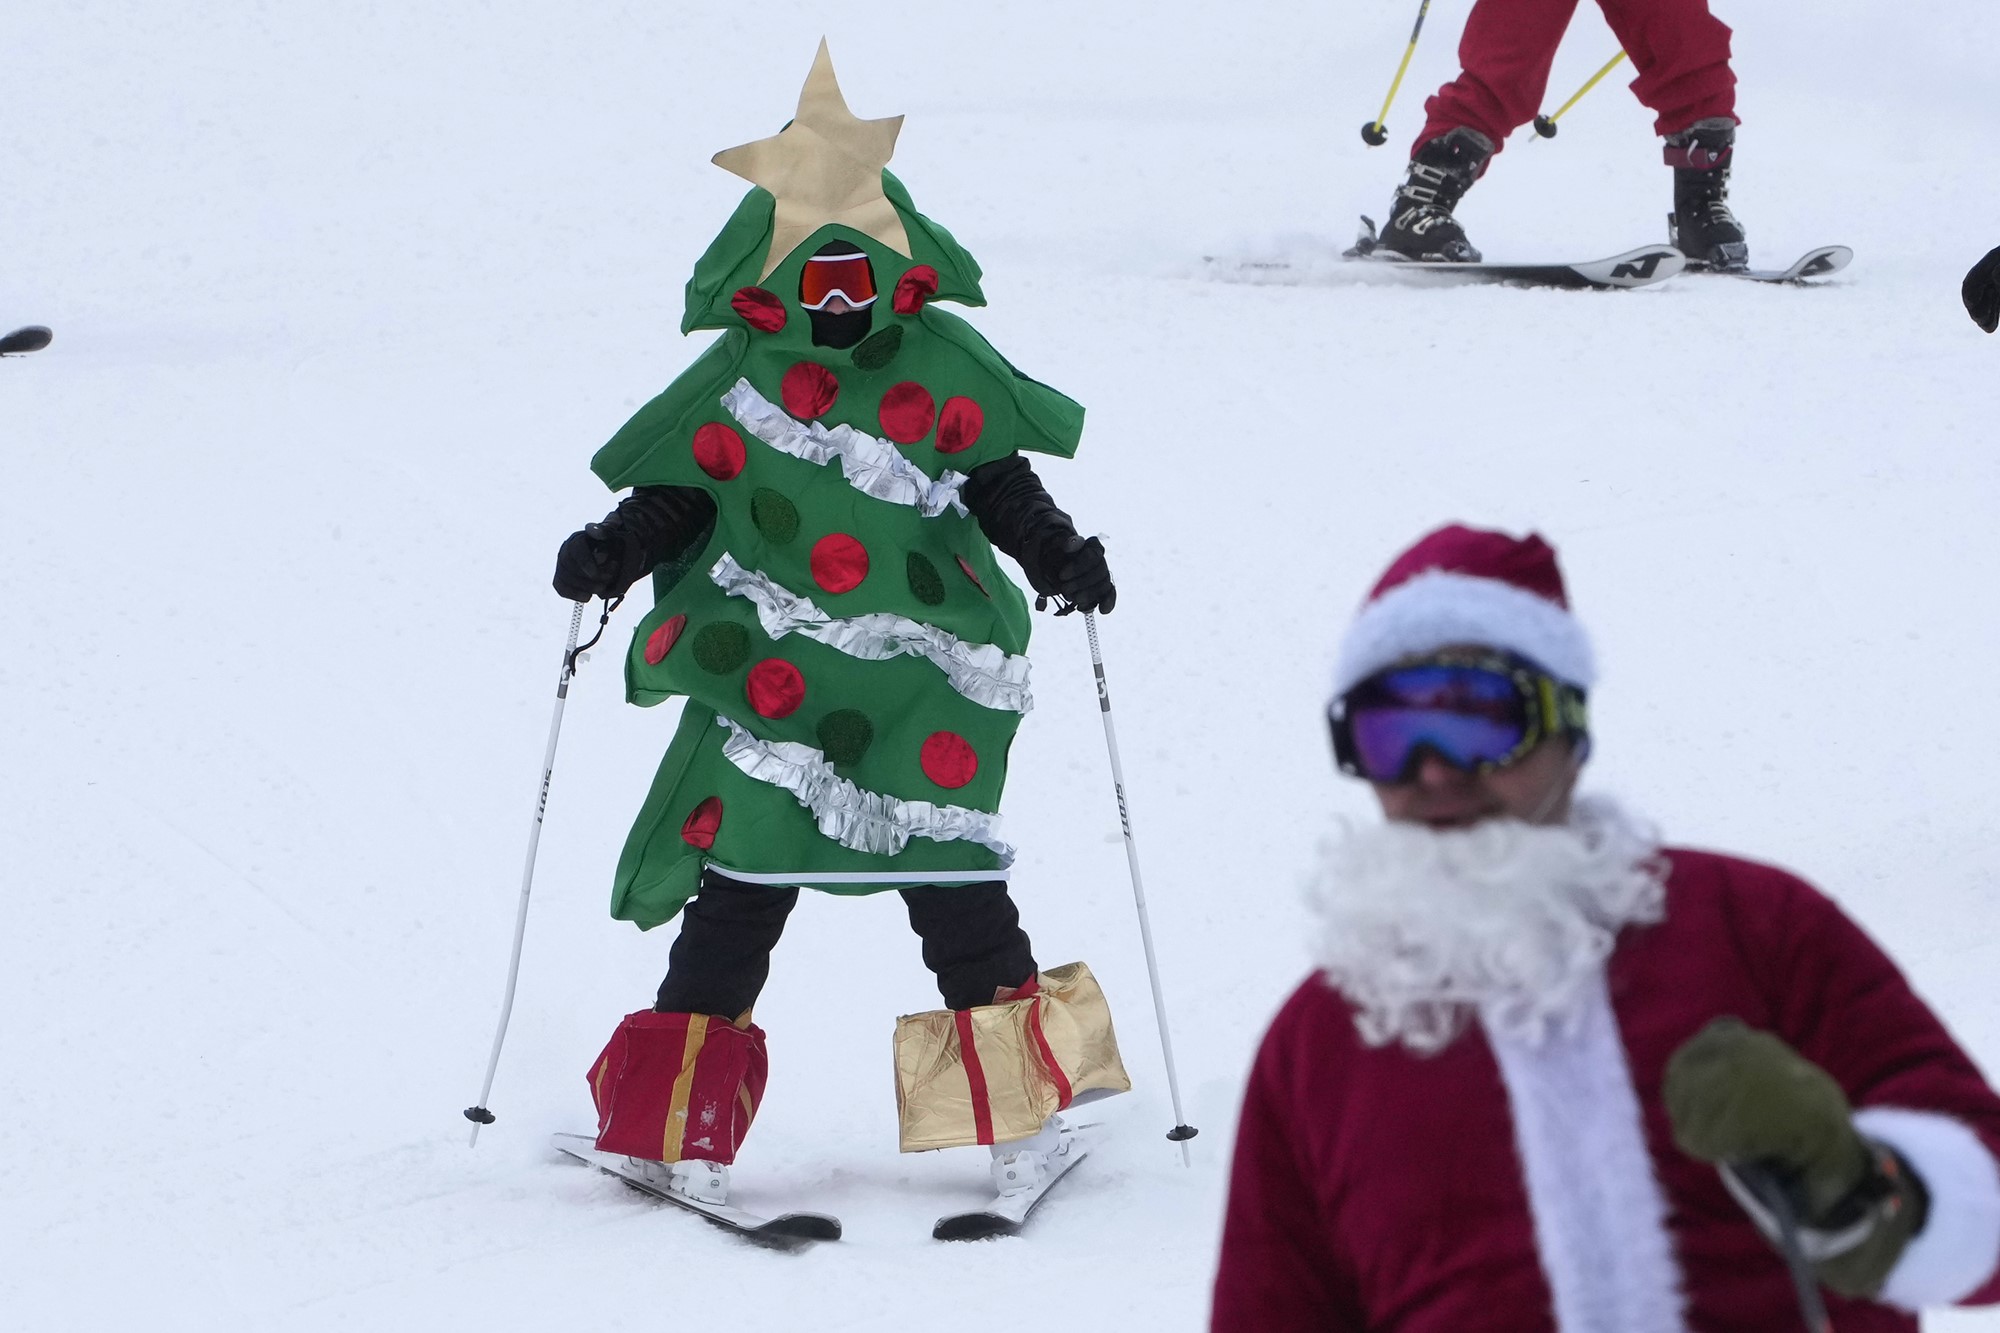 A person in a Christmas tree costume skis downhill.